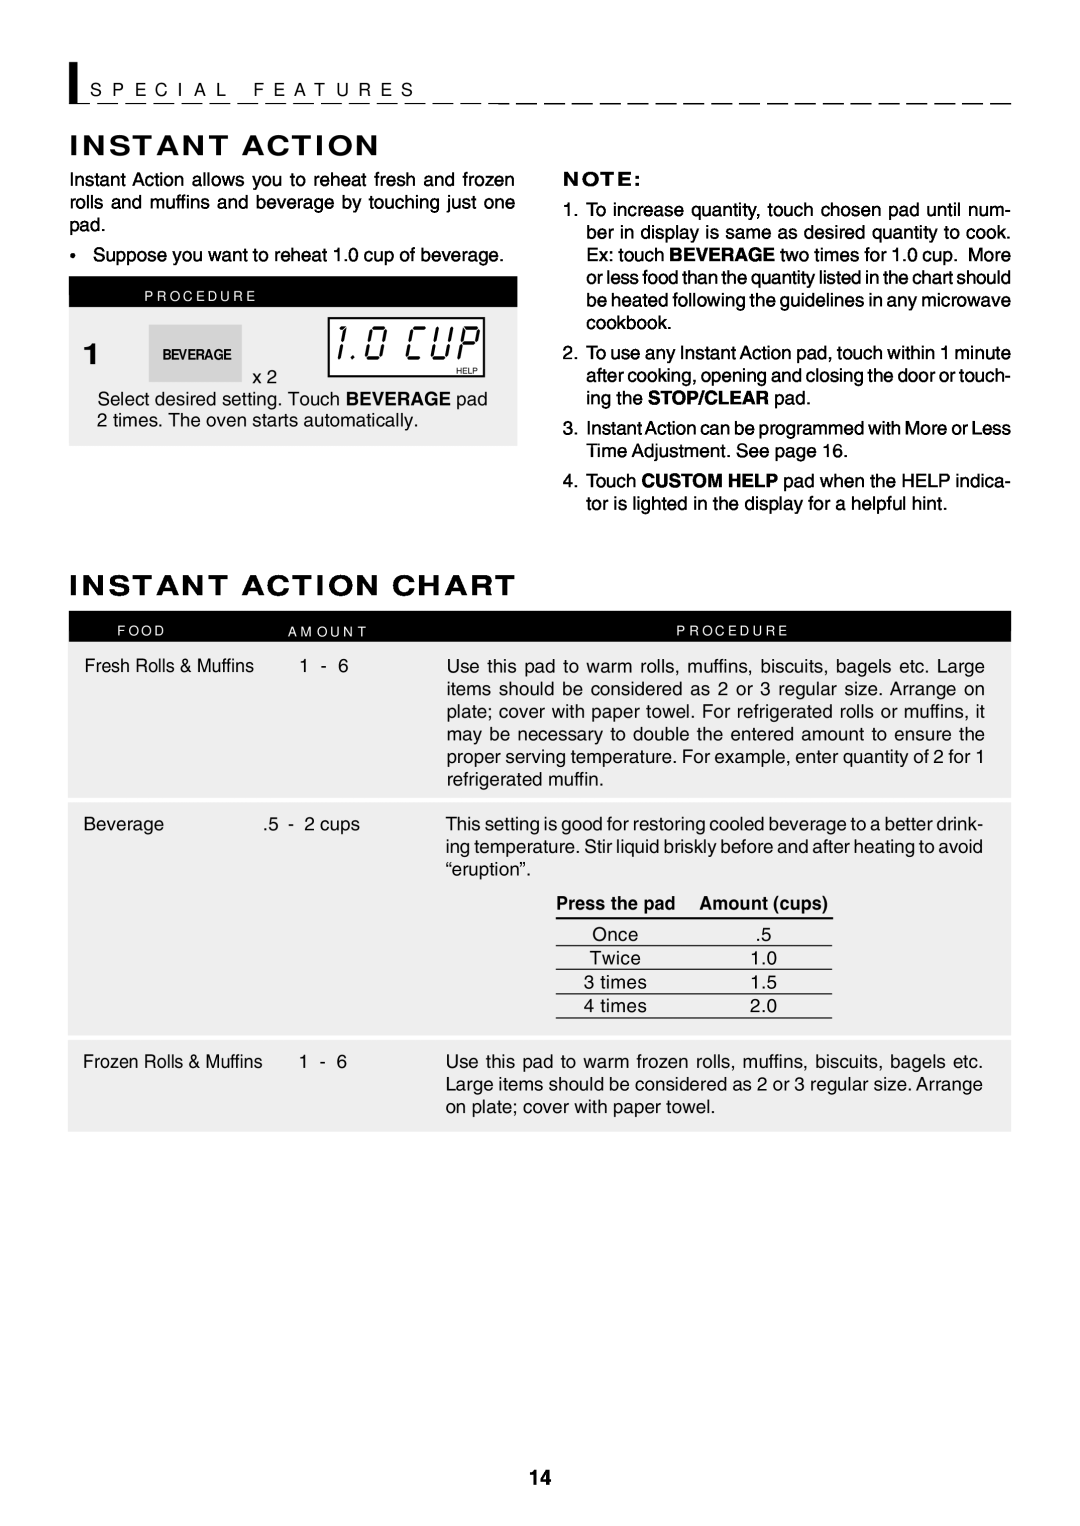 Sharp R-319F manual Instant Action Chart, S P E C I A L F E A T U R E S, 1 . 0 C U P, Amount cups 